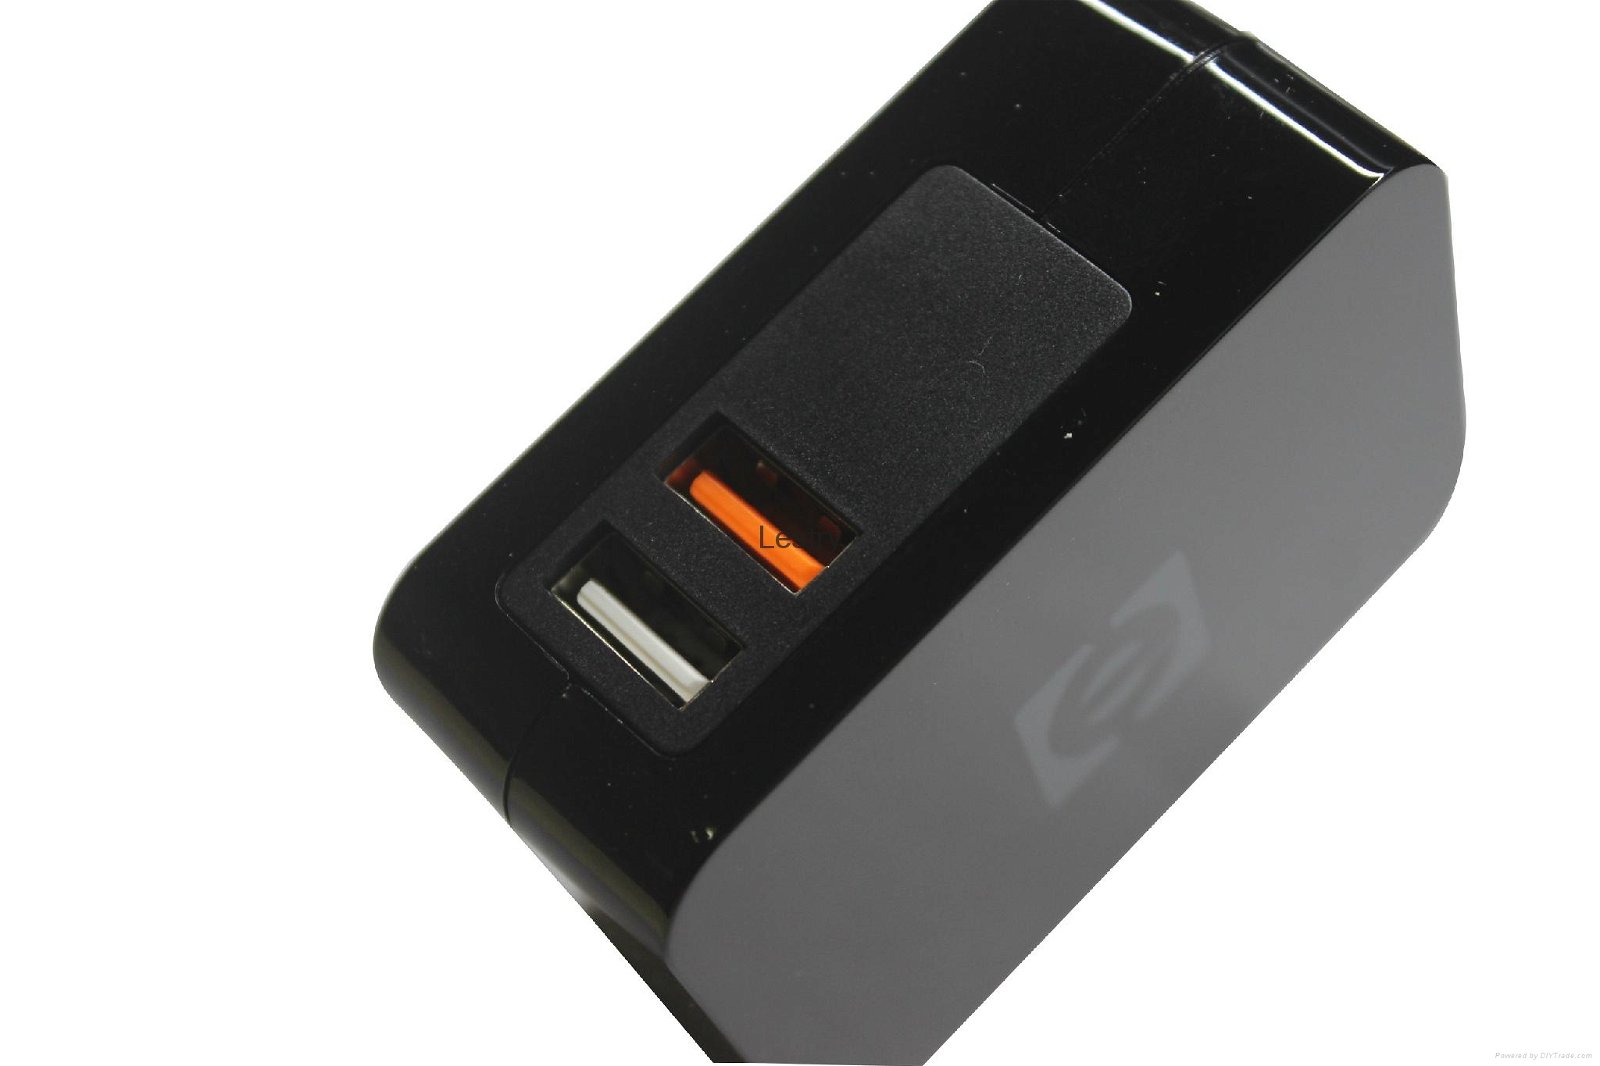 Shenzhen Black Quick charger dual USB port phone charger adapter factory